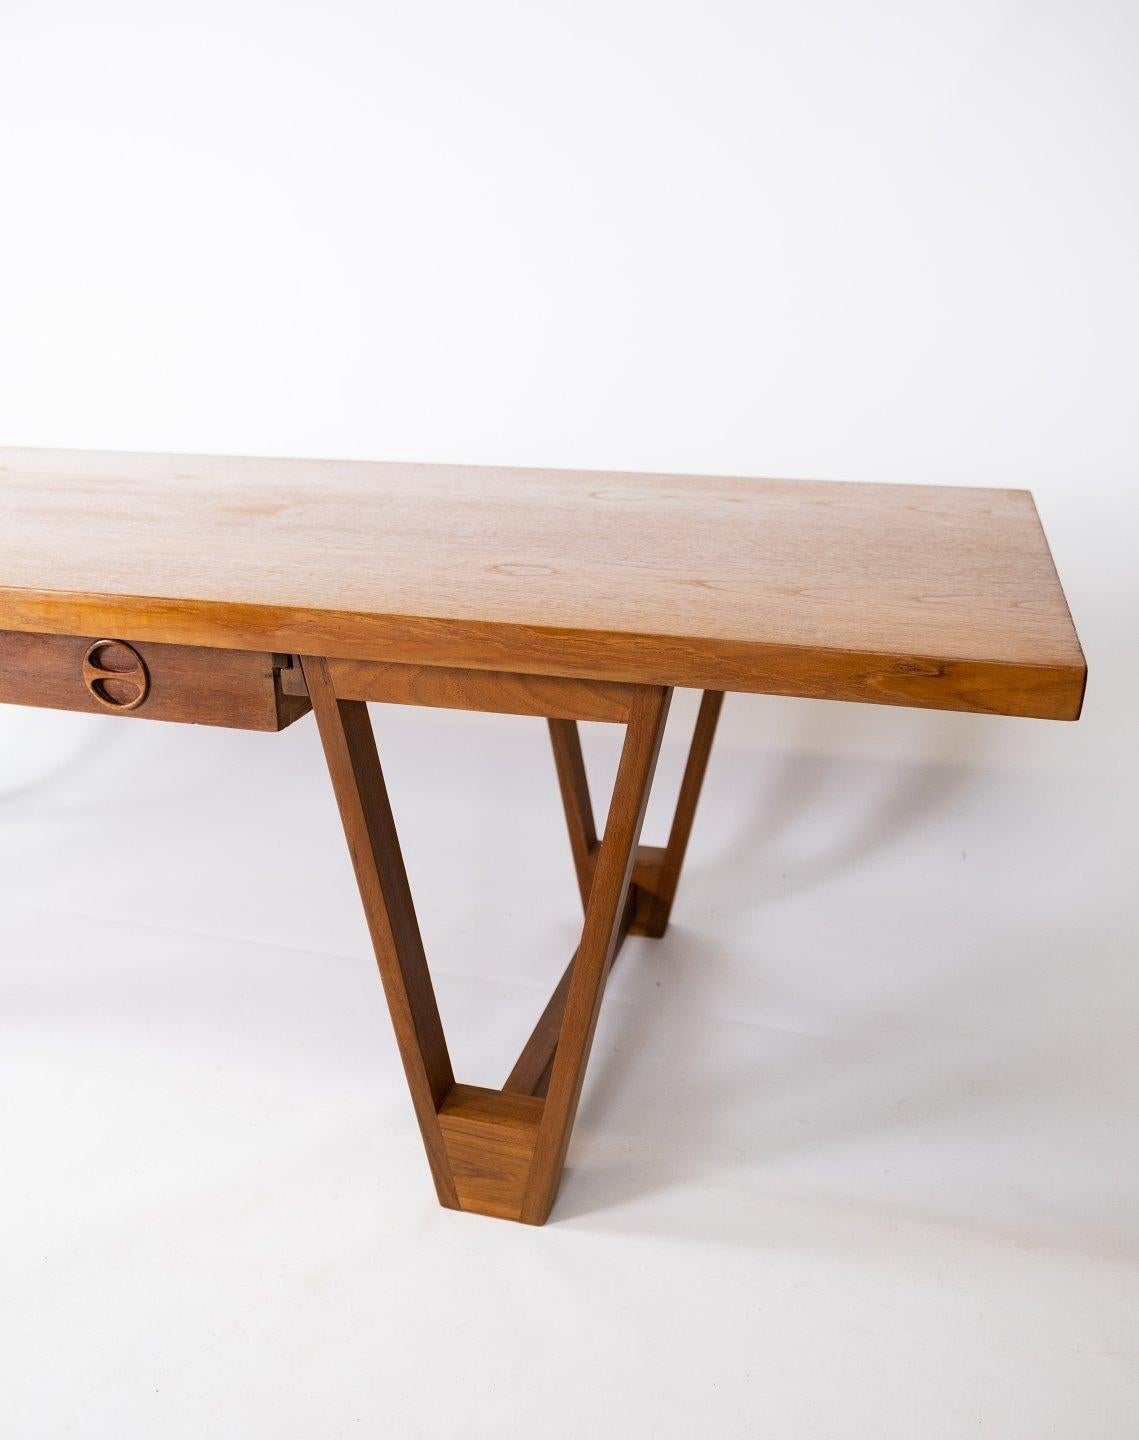 Mid-Century Modern Coffee Table Made In Teak Designed By Illum Wikkelsø From 1960s For Sale